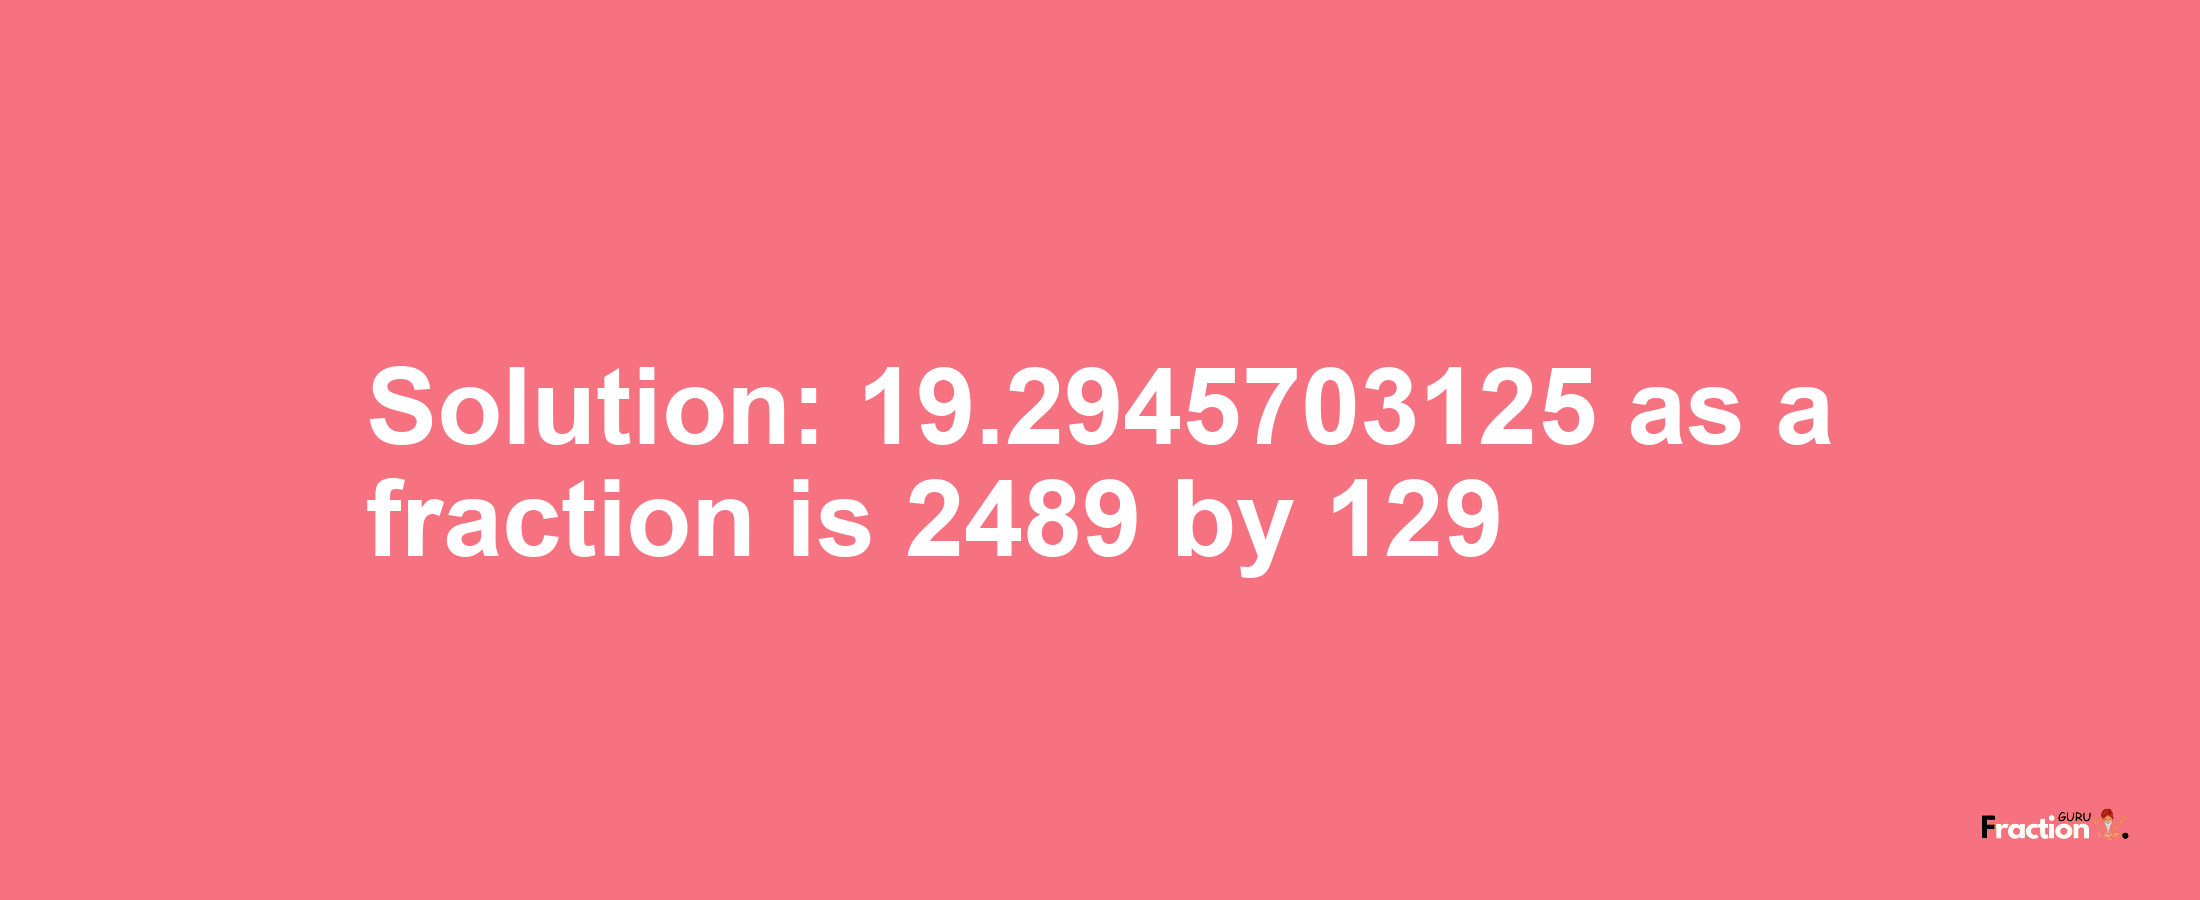 Solution:19.2945703125 as a fraction is 2489/129